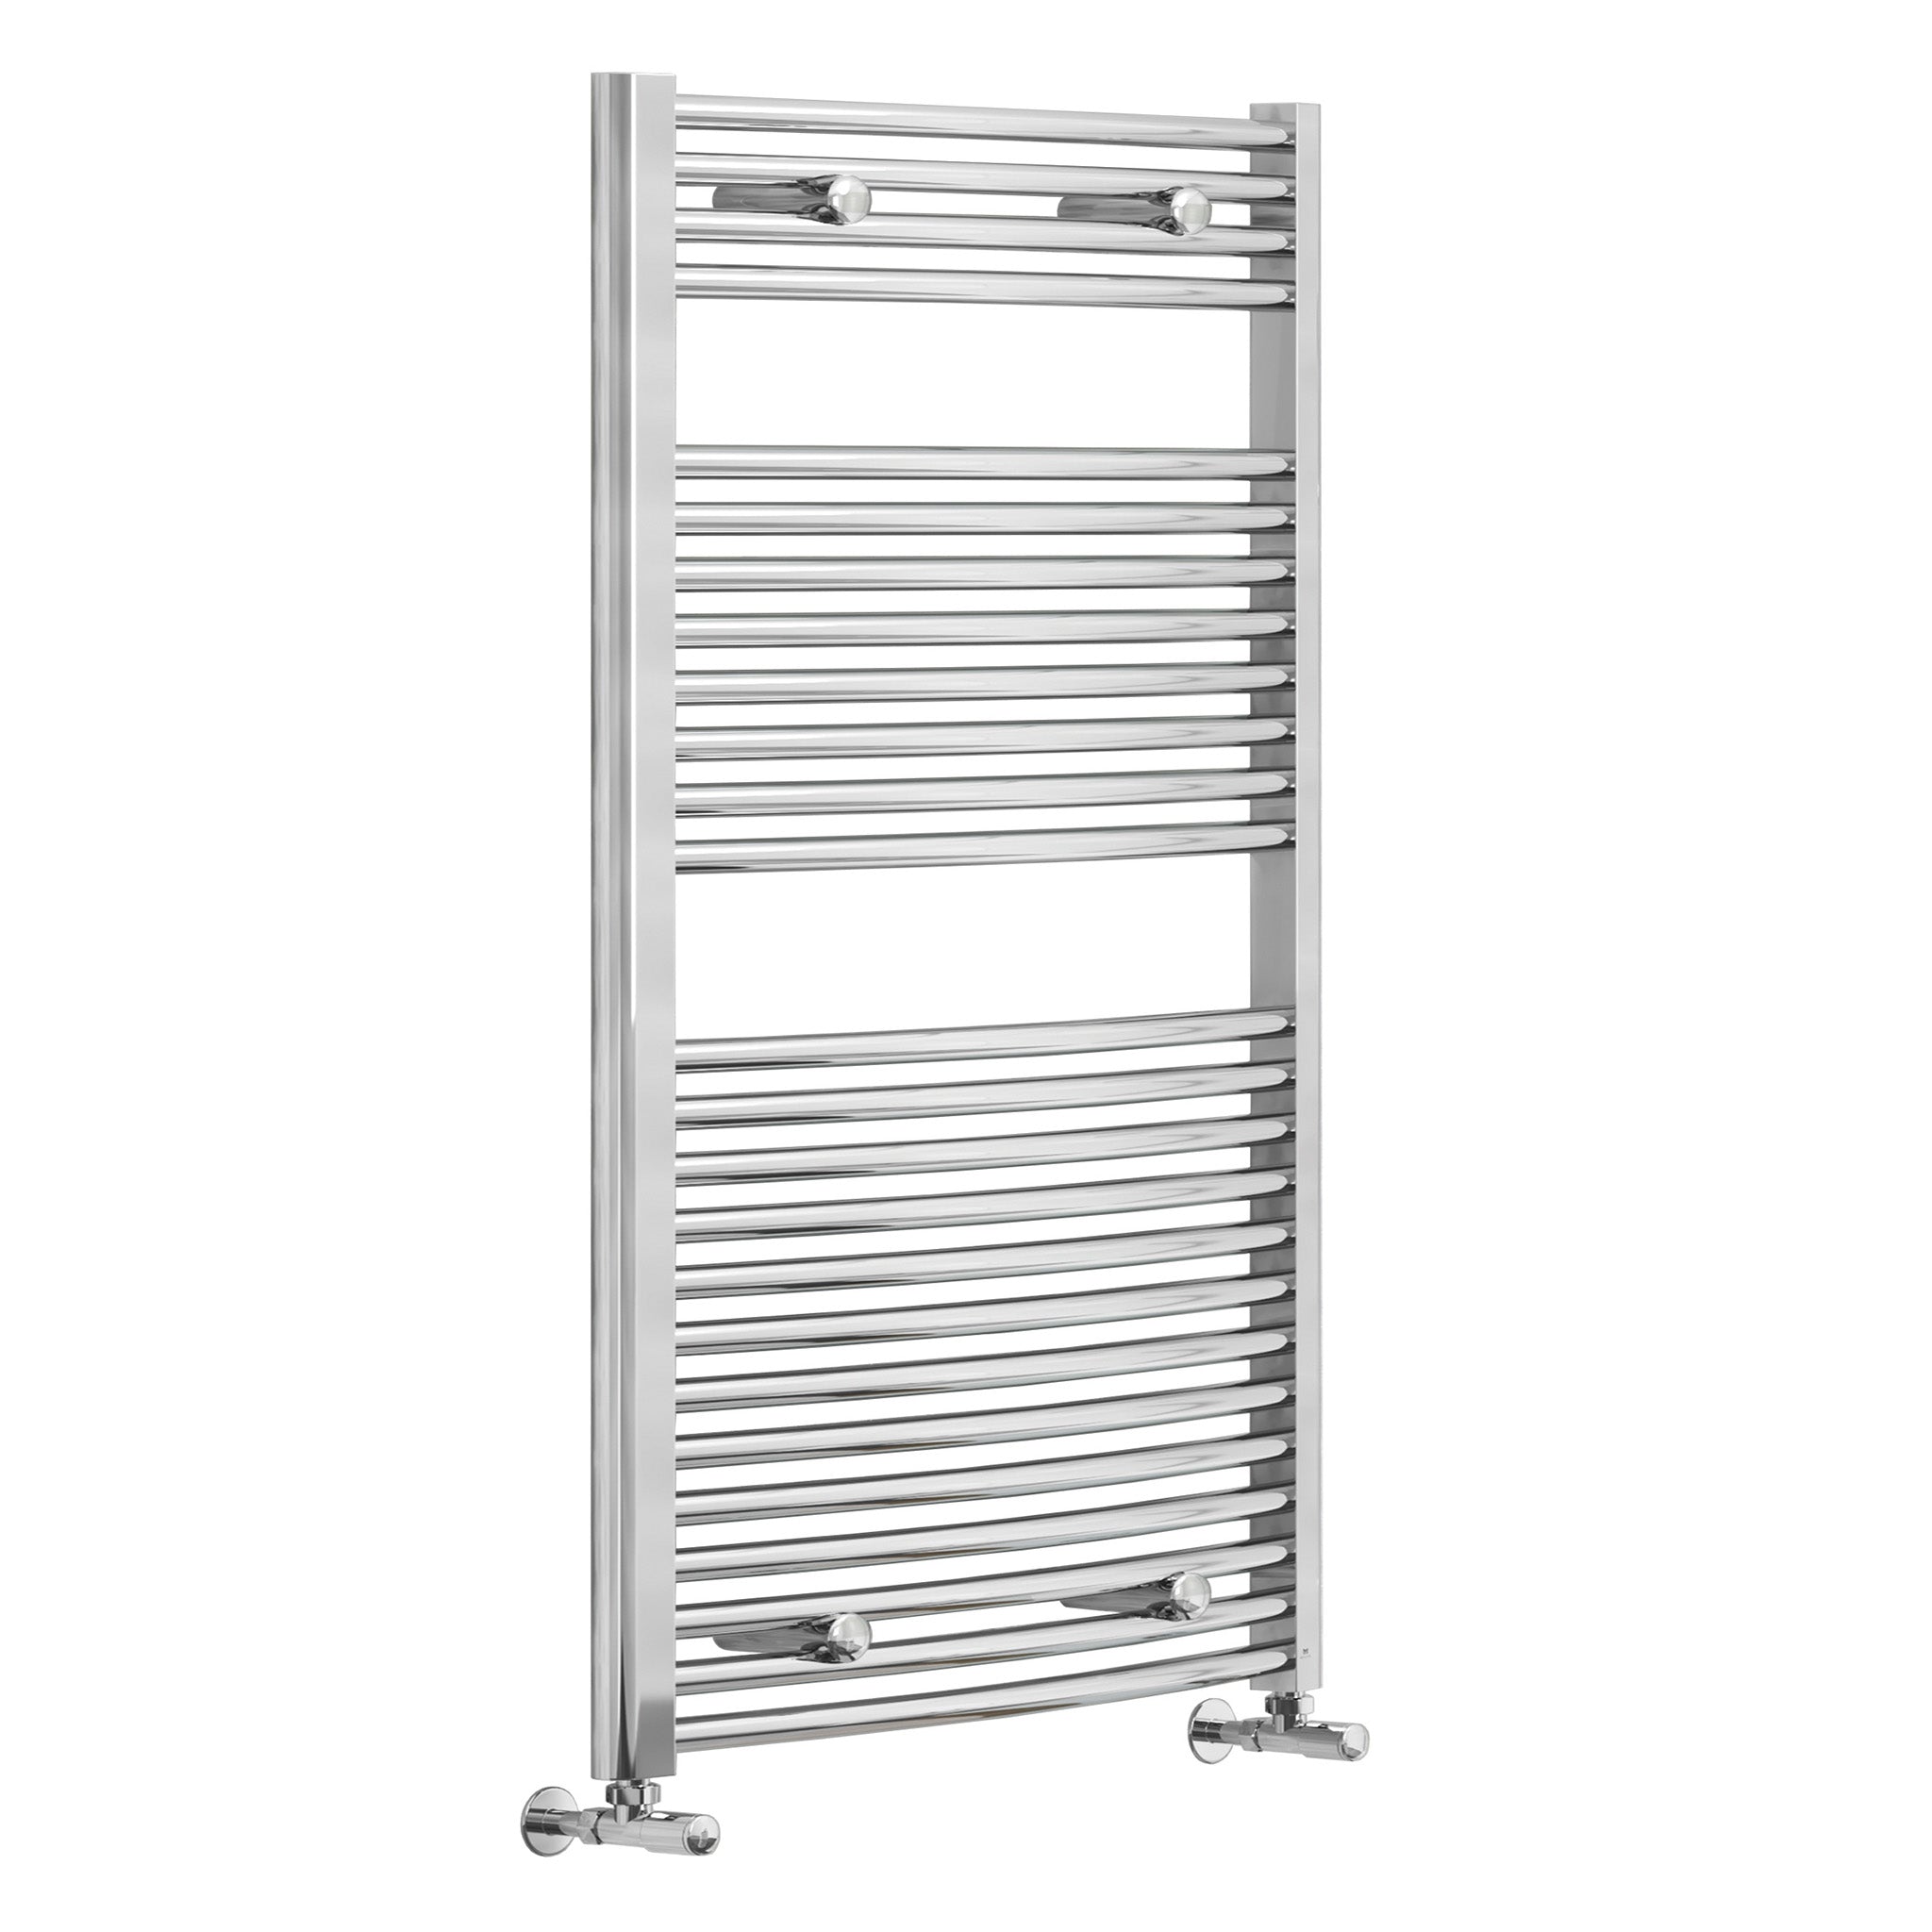 MyLife Clearance Vine Curved Wall Mounted Heated Towel Rail 1200 x 600mm